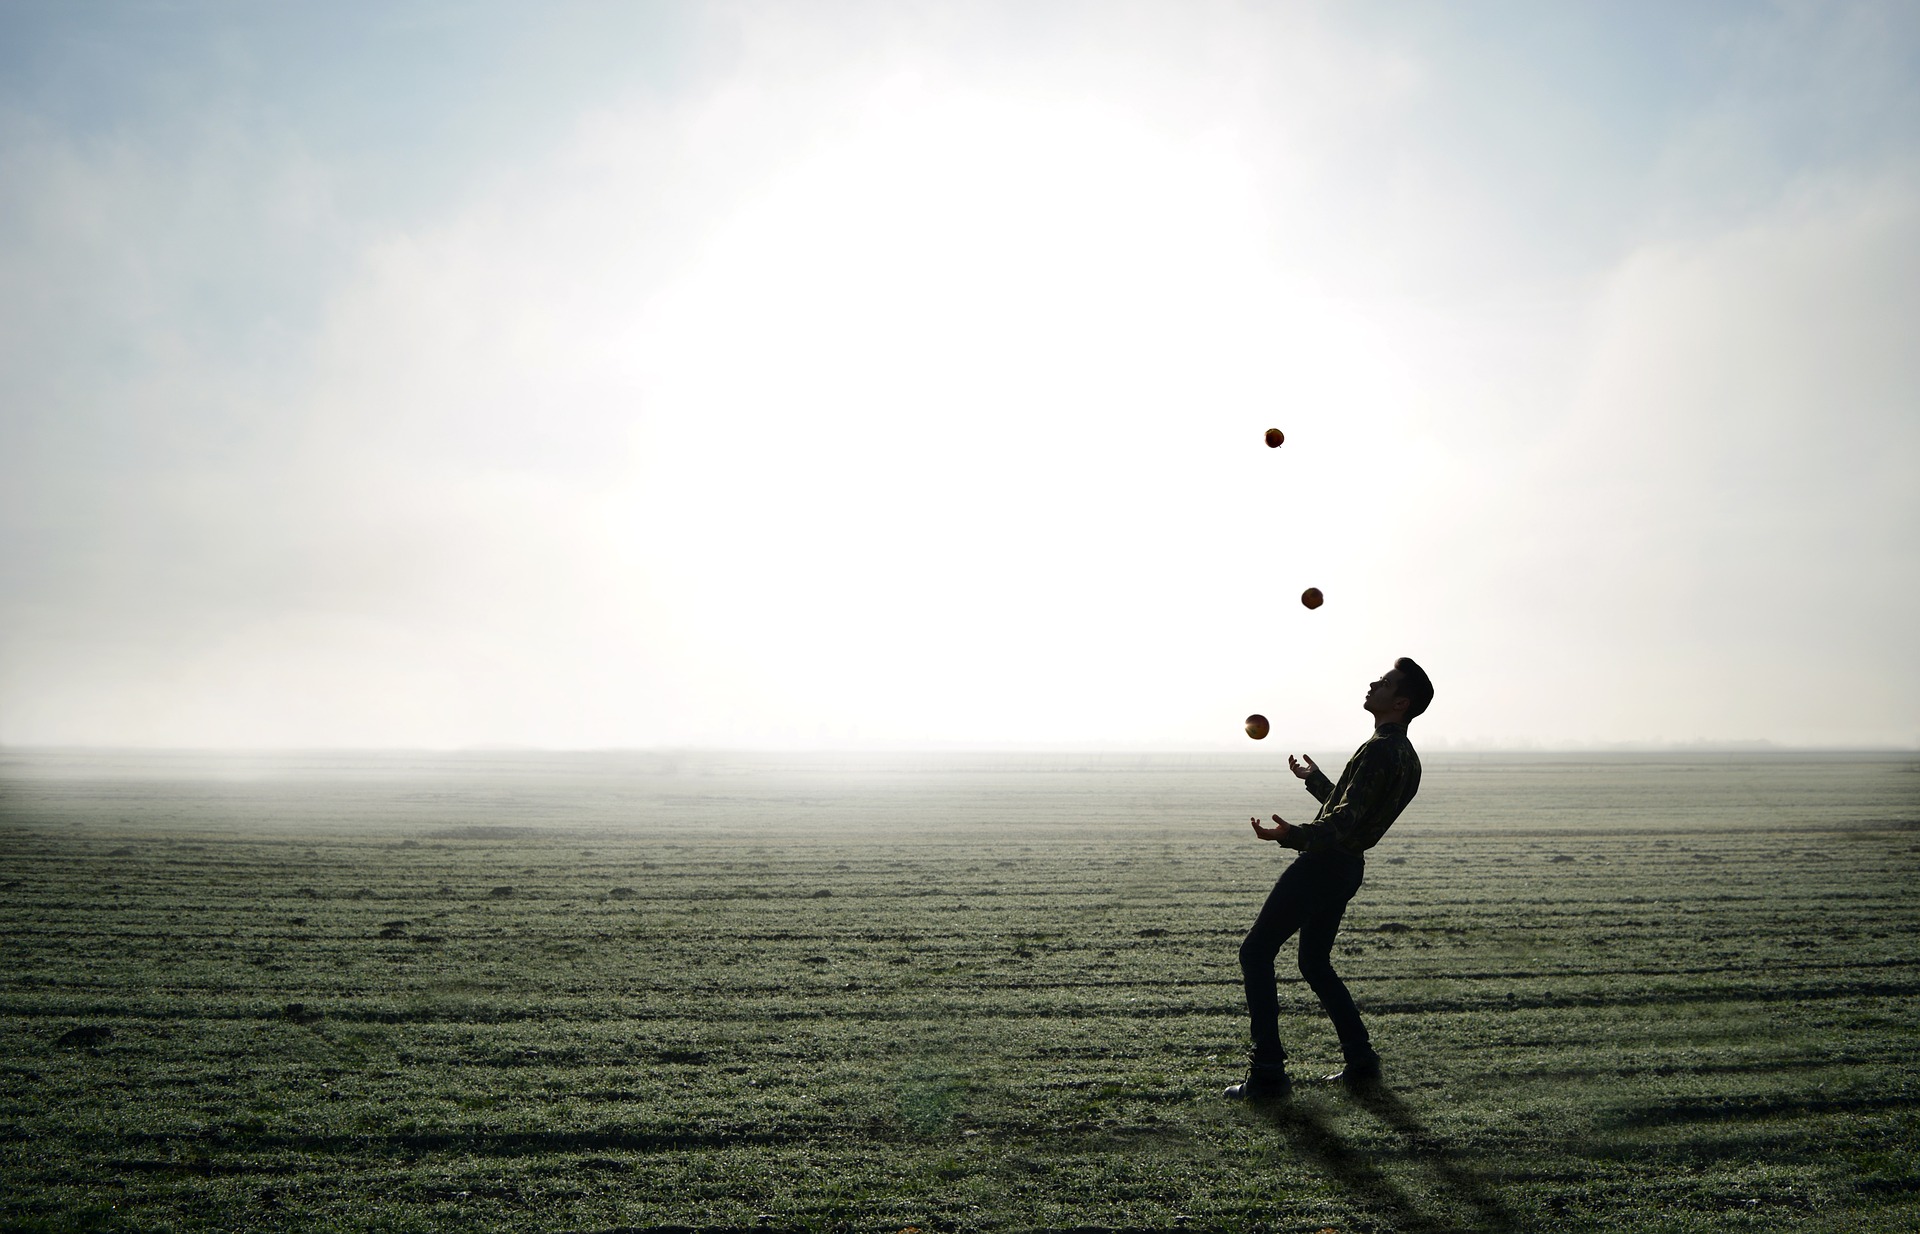 A juggler with three balls on a misty and empty field